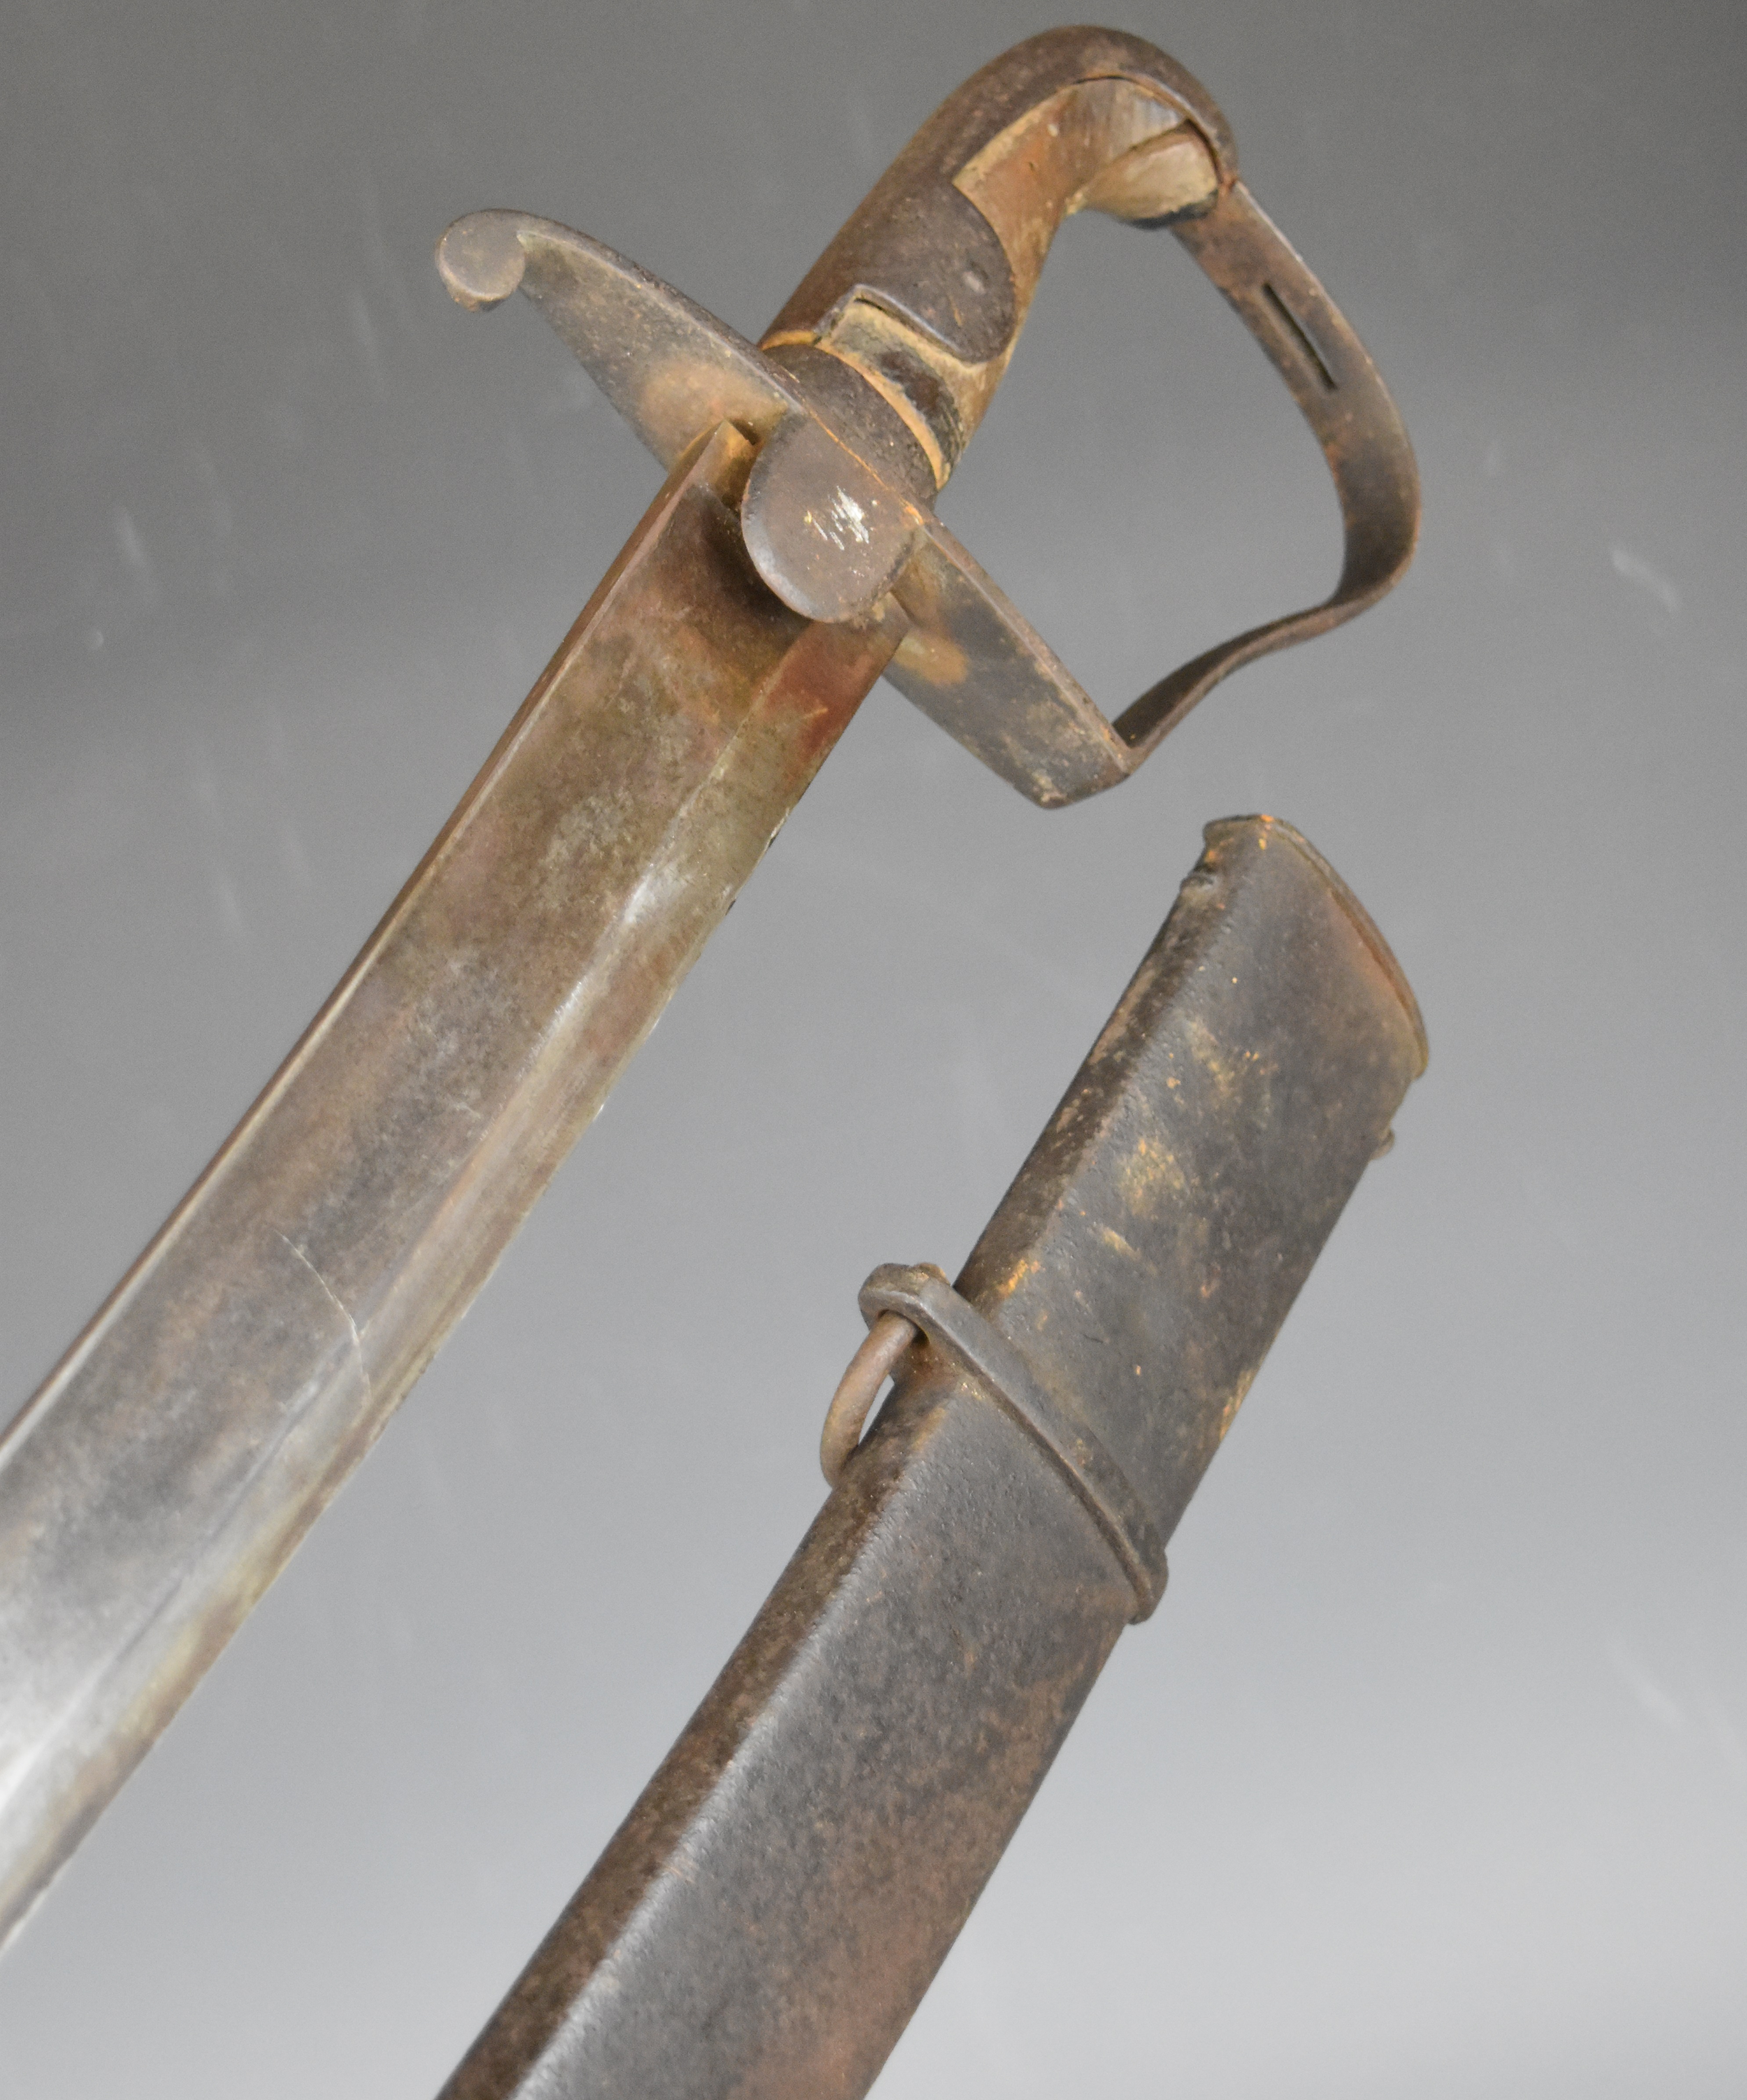 British 1796 pattern Light Cavalry Trooper's sword, with 81cm curved blade and scabbard. PLEASE NOTE